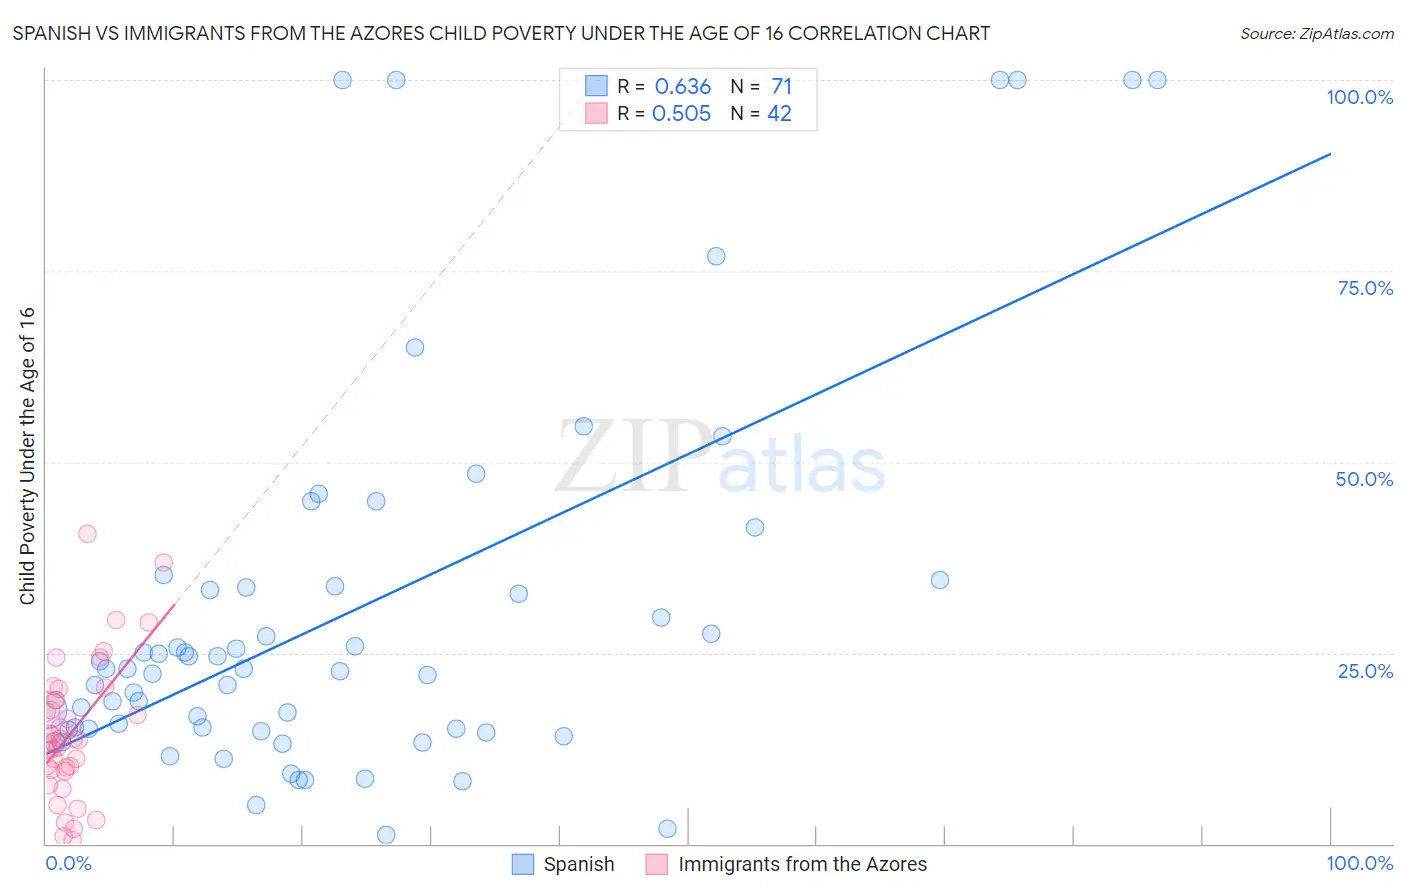 Spanish vs Immigrants from the Azores Child Poverty Under the Age of 16